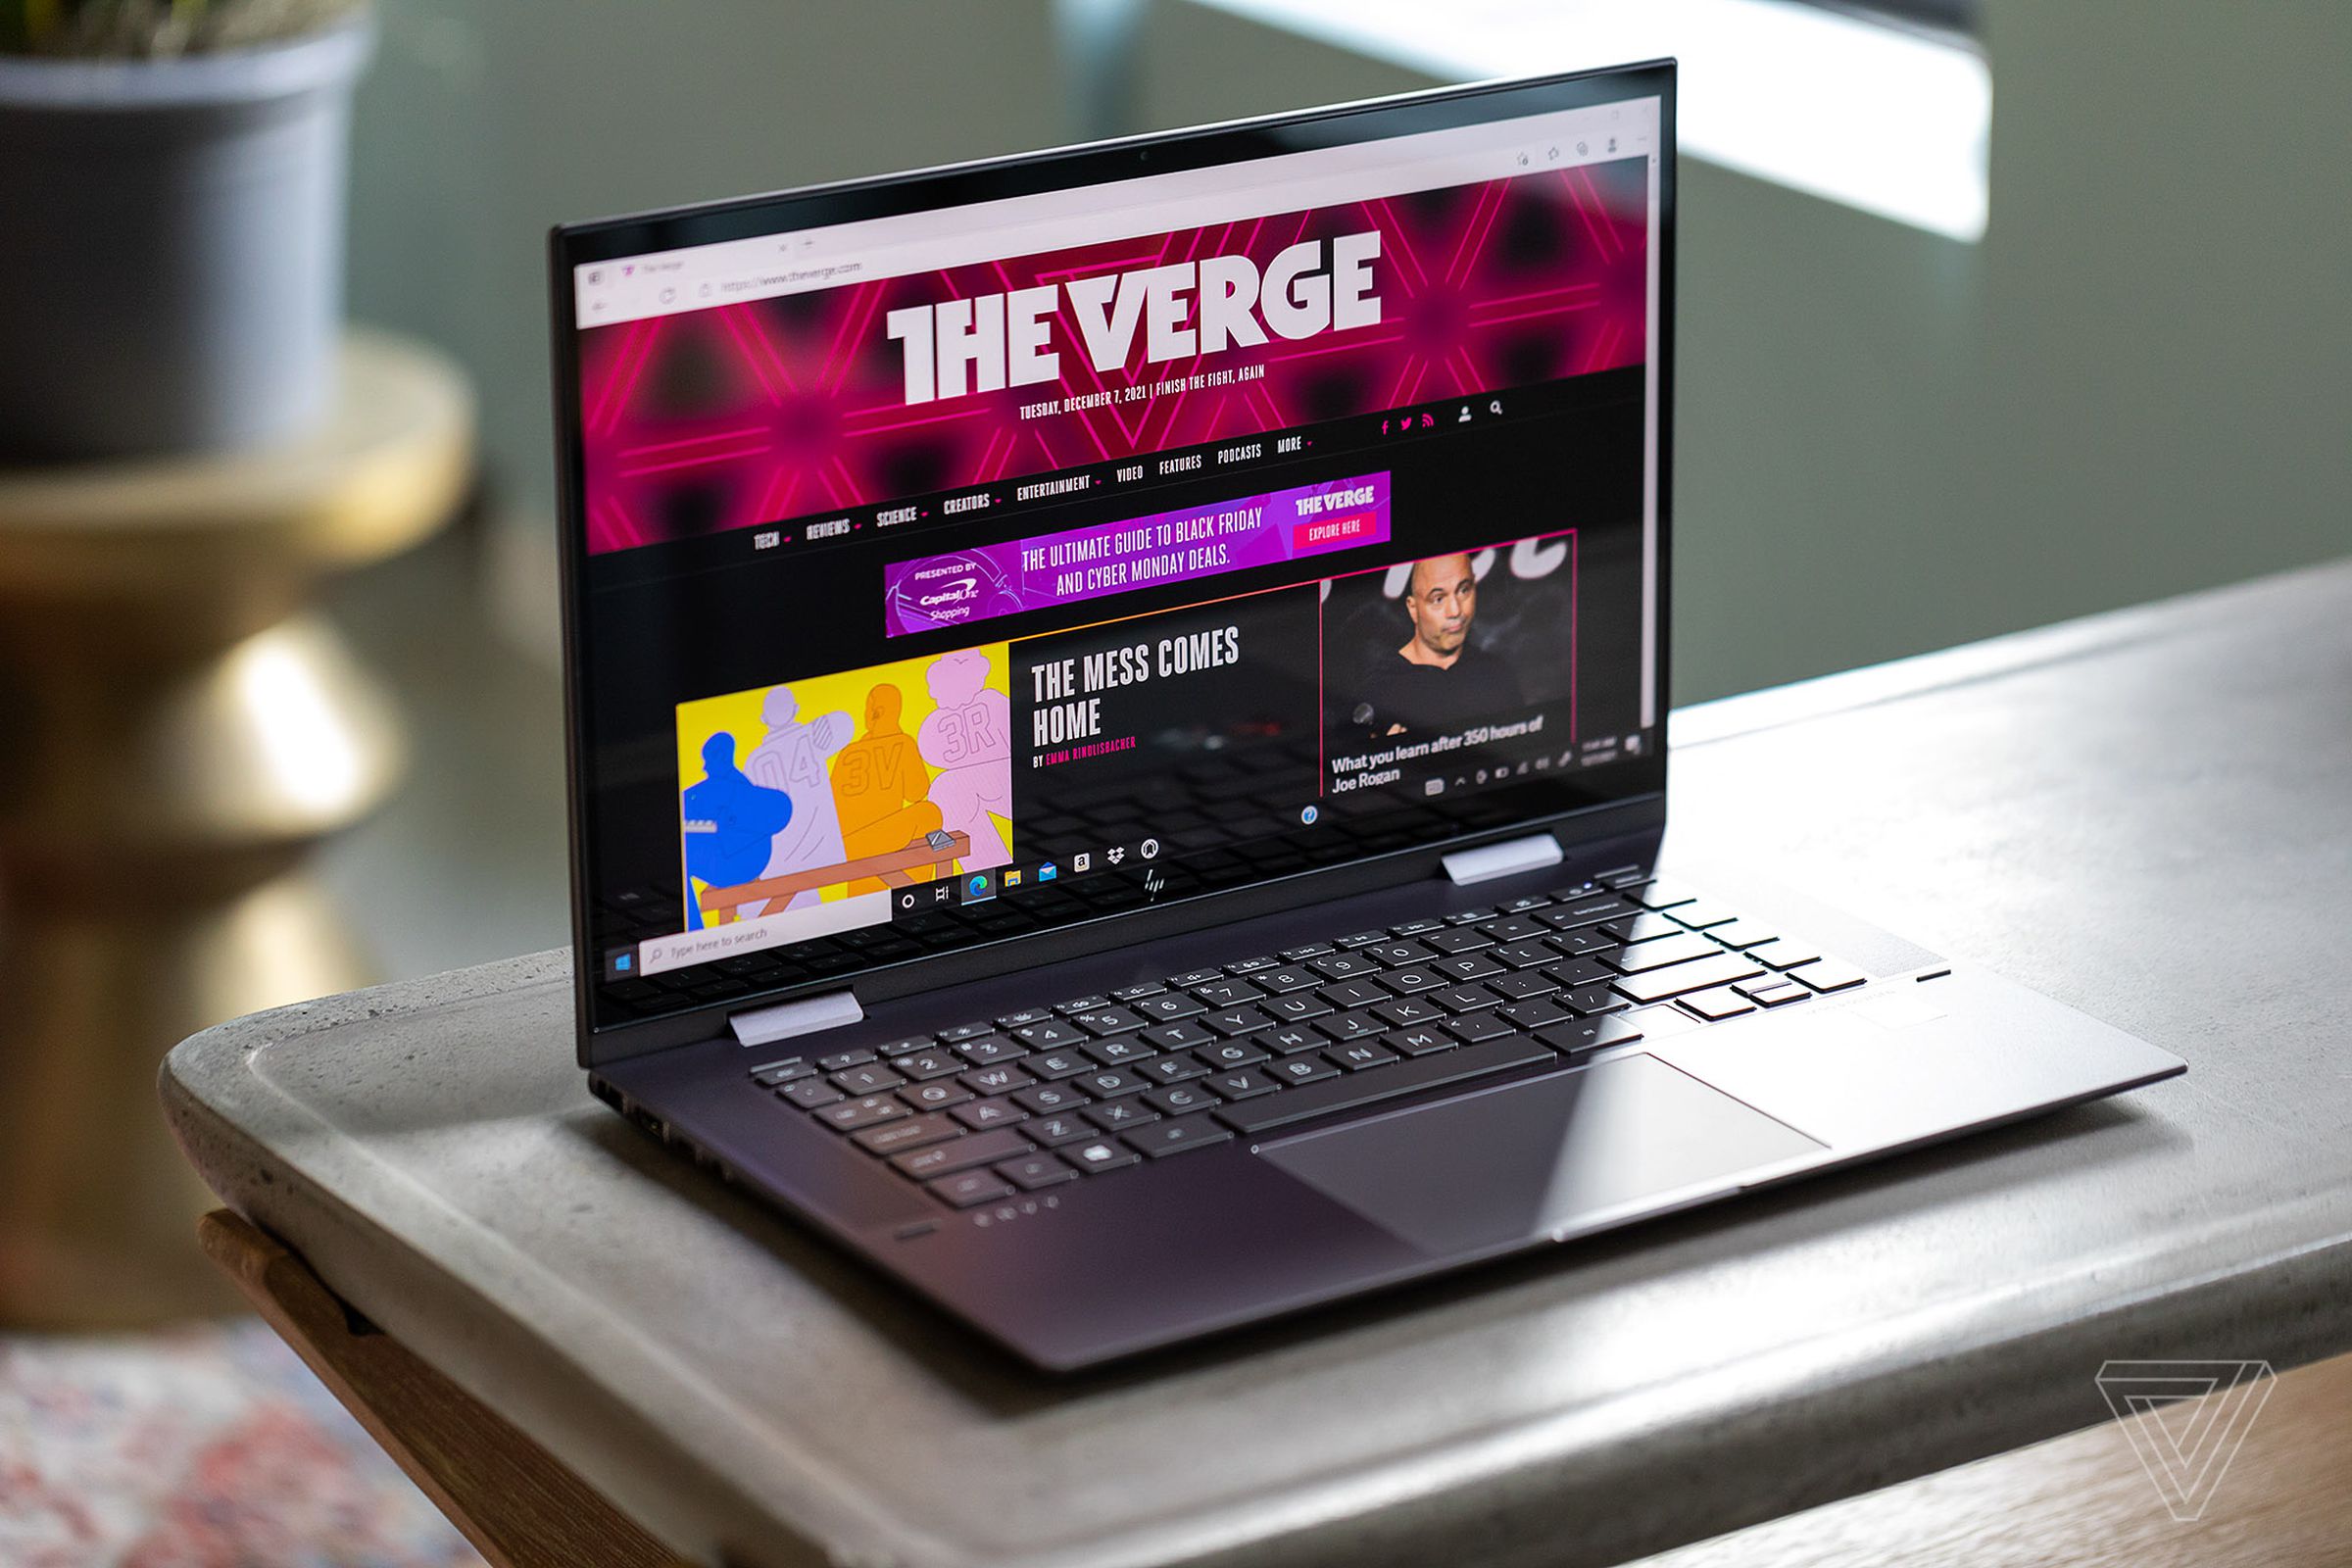 Best Cheap Laptop 2023: The HP Envy x360 15 displaying The Verge homepage.